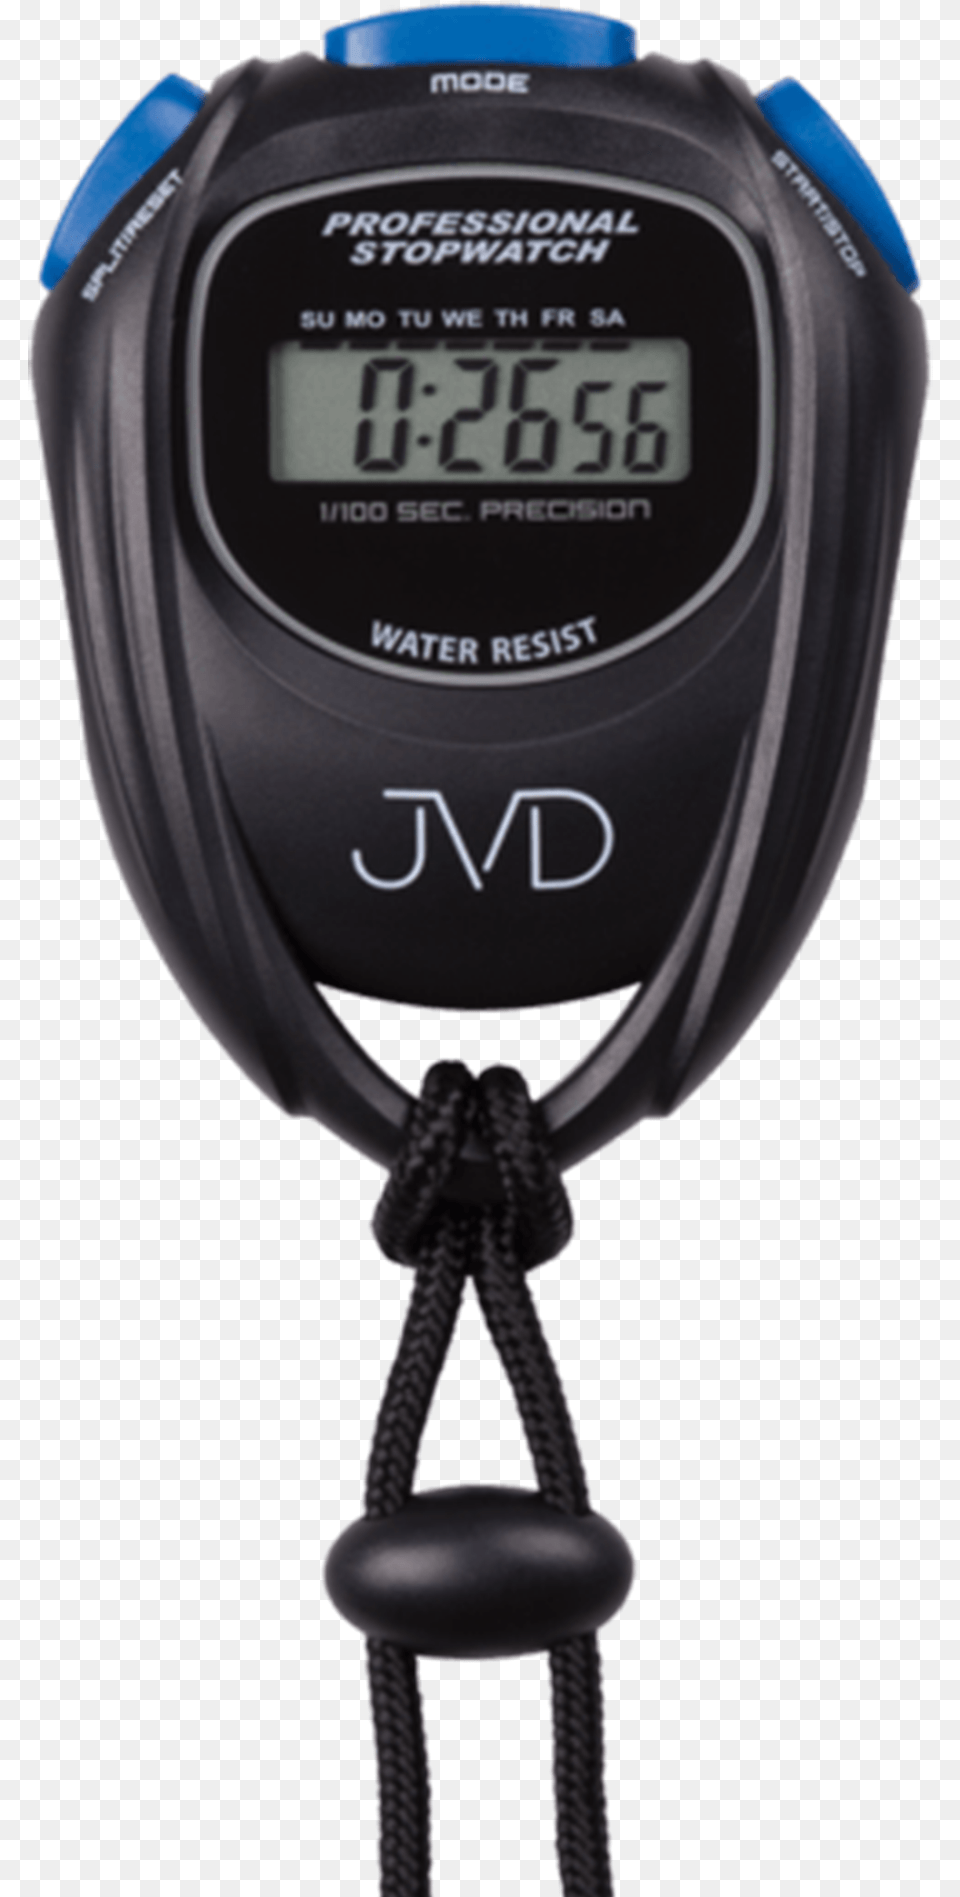 Profesional Stopwatch Jvd St80 Electronic Stopwatch Free Png